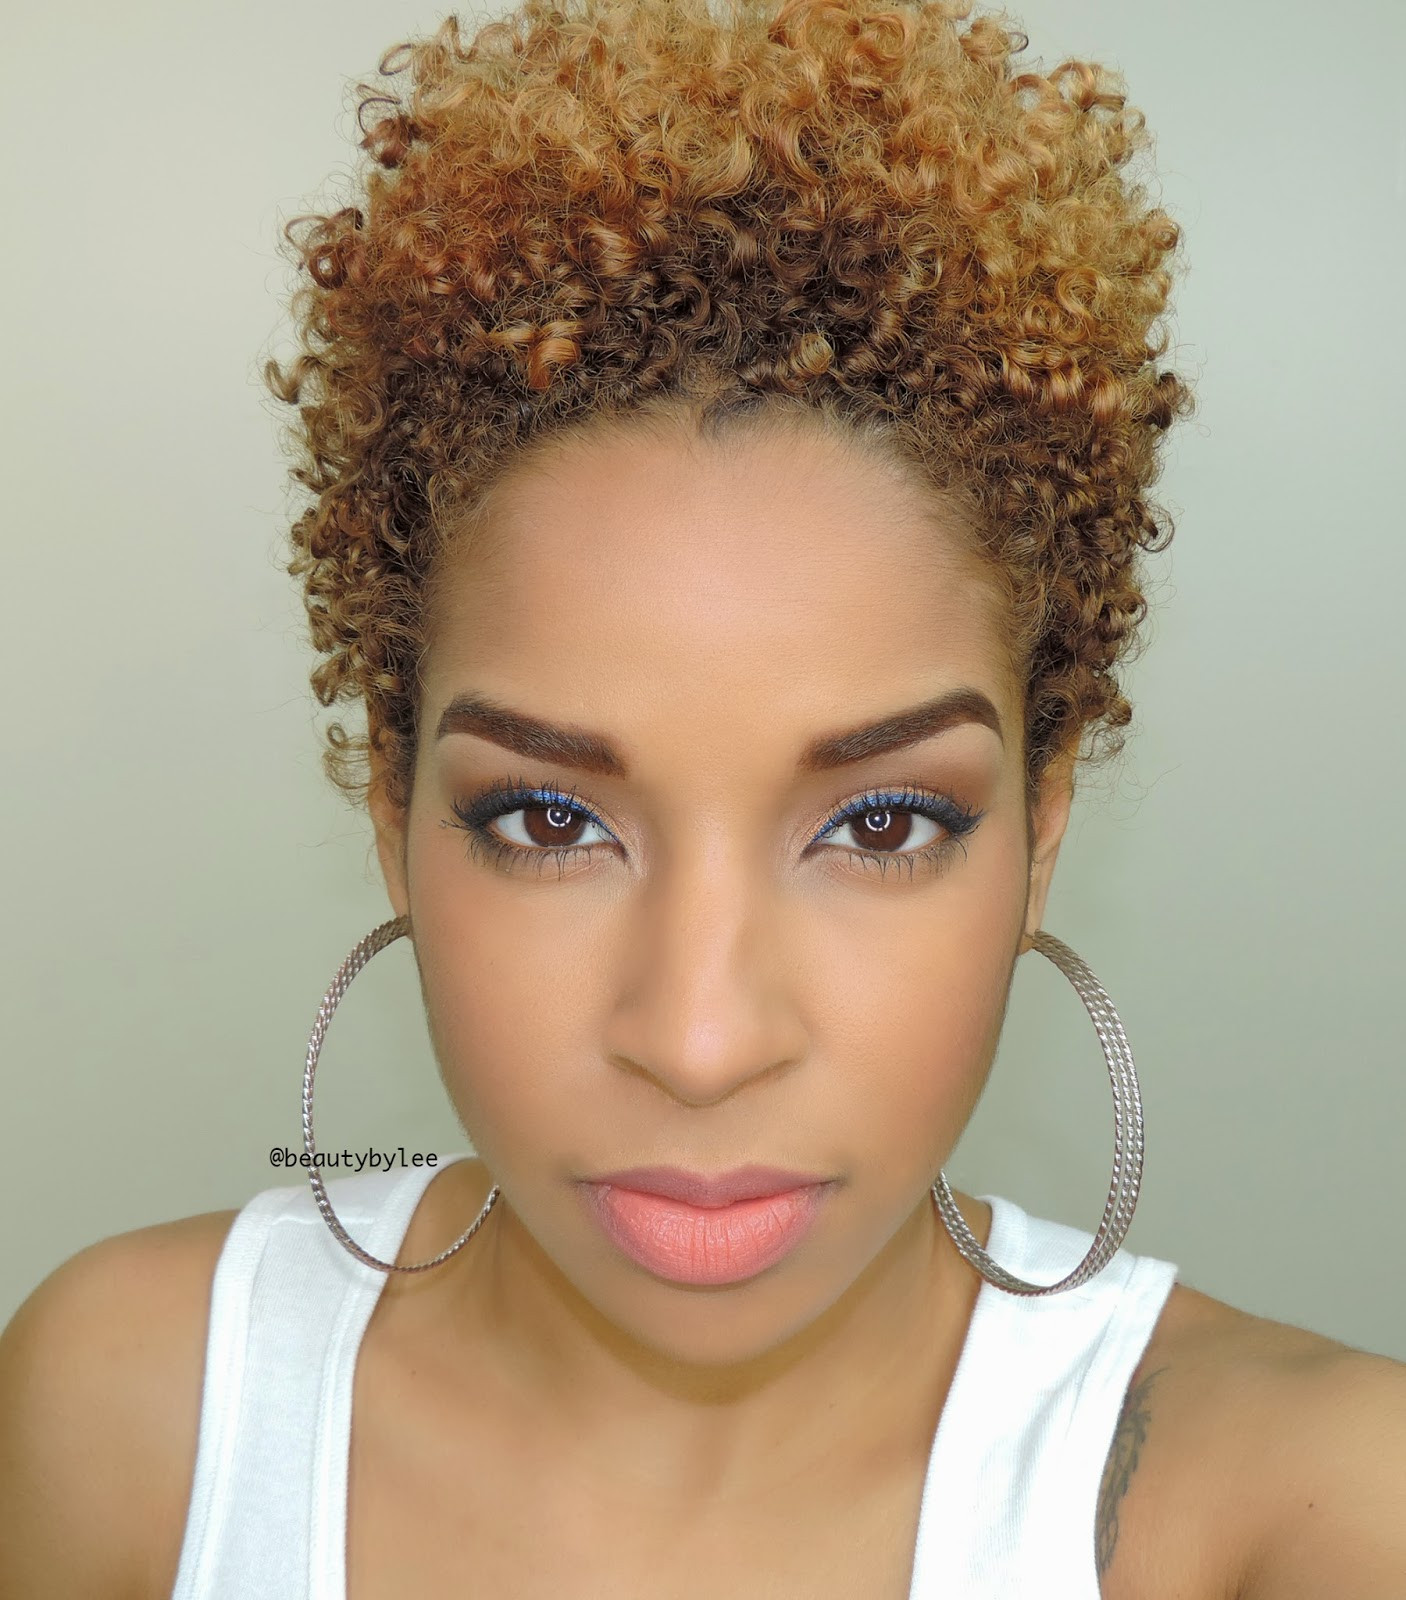 Hairstyles For Black Women With Thin Hair
 70 Best Short Hairstyles for Black Women with Thin Hair